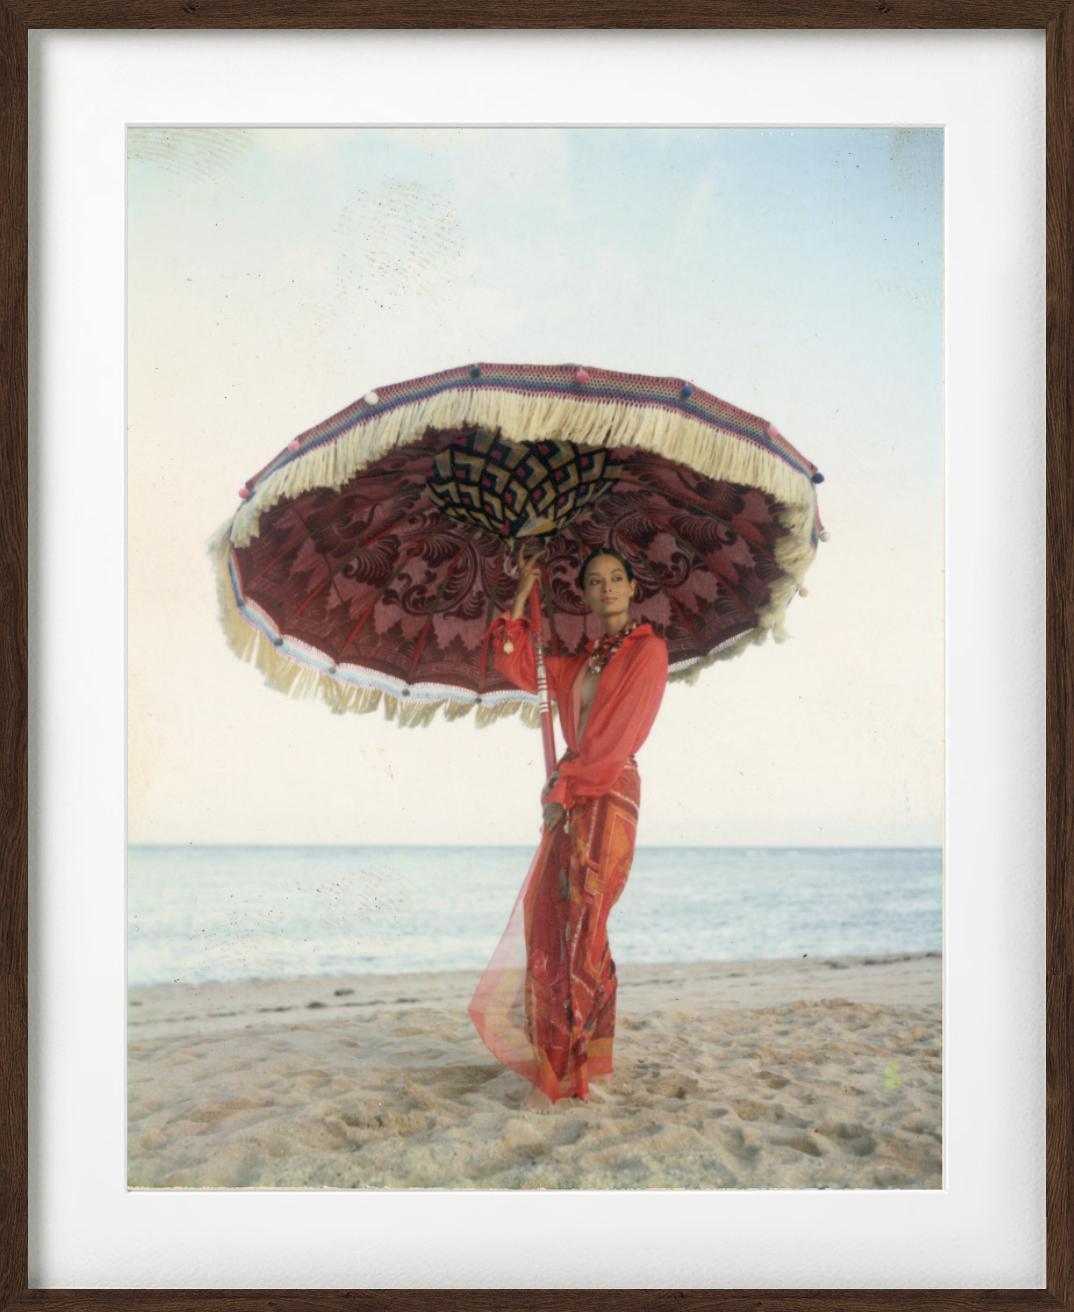 'Leticia H., Bali' - in red under a red parasol, fine art photography, 1993 - Black Figurative Photograph by Bruno Bisang